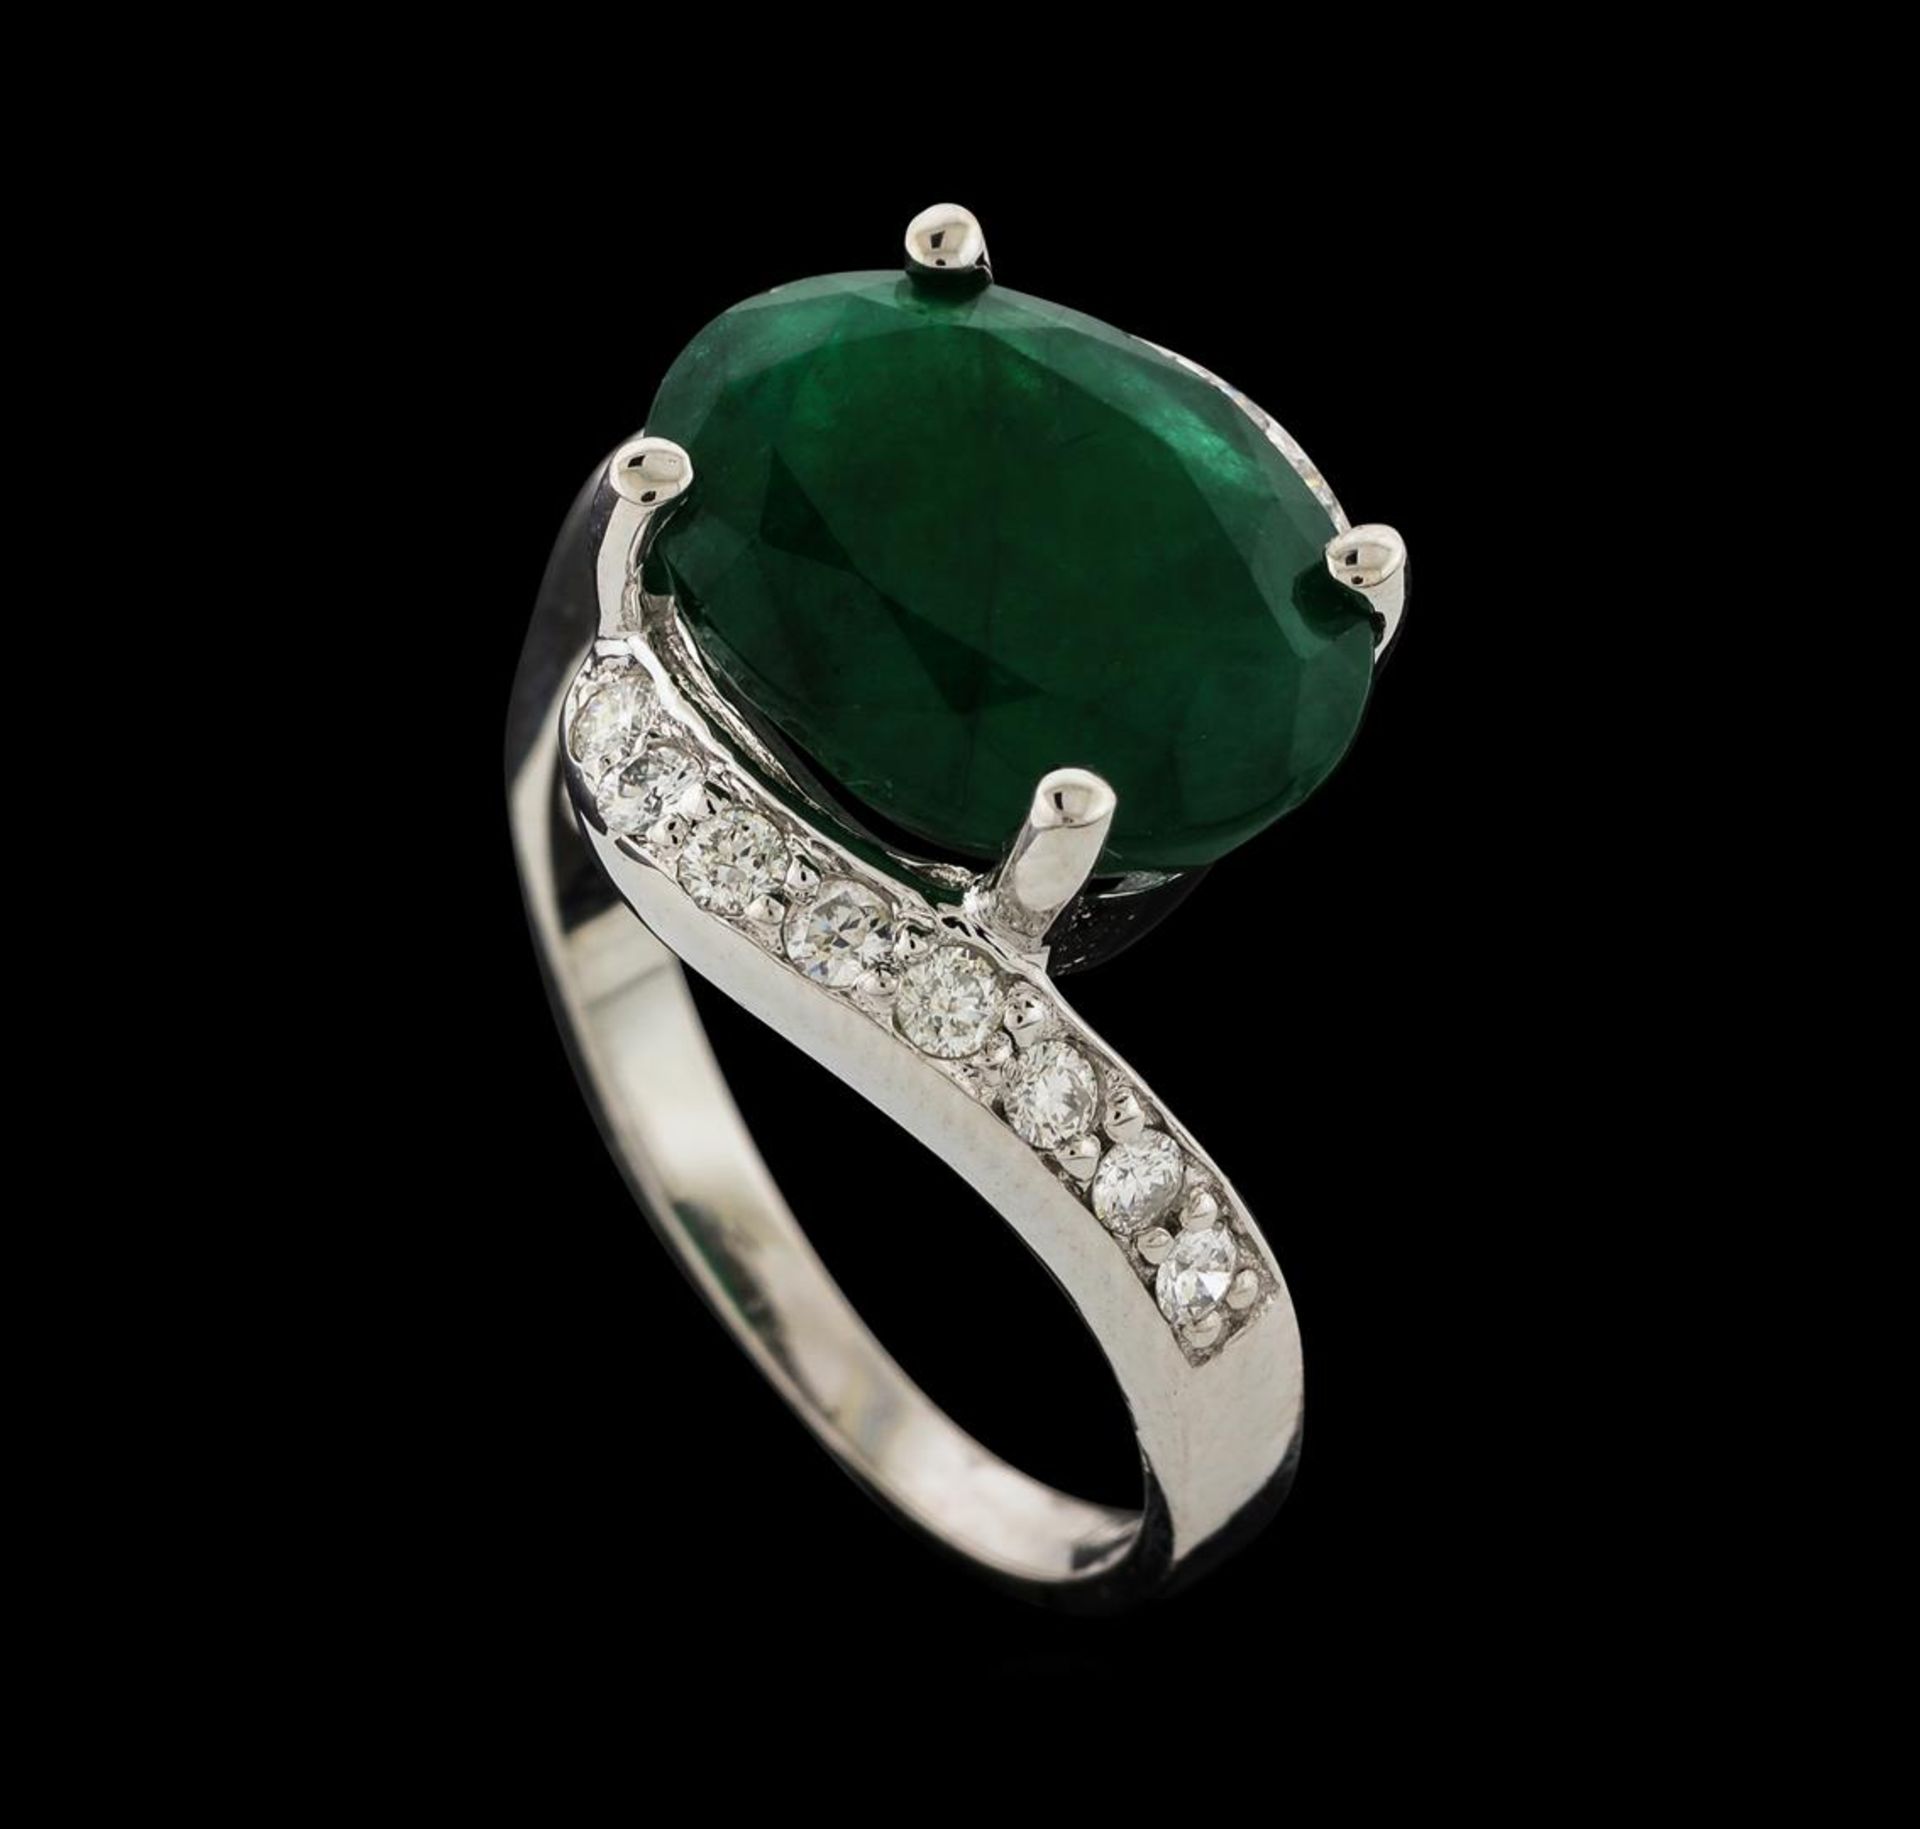 4.91 ctw Emerald and Diamond Ring - 14KT White Gold - Image 4 of 4